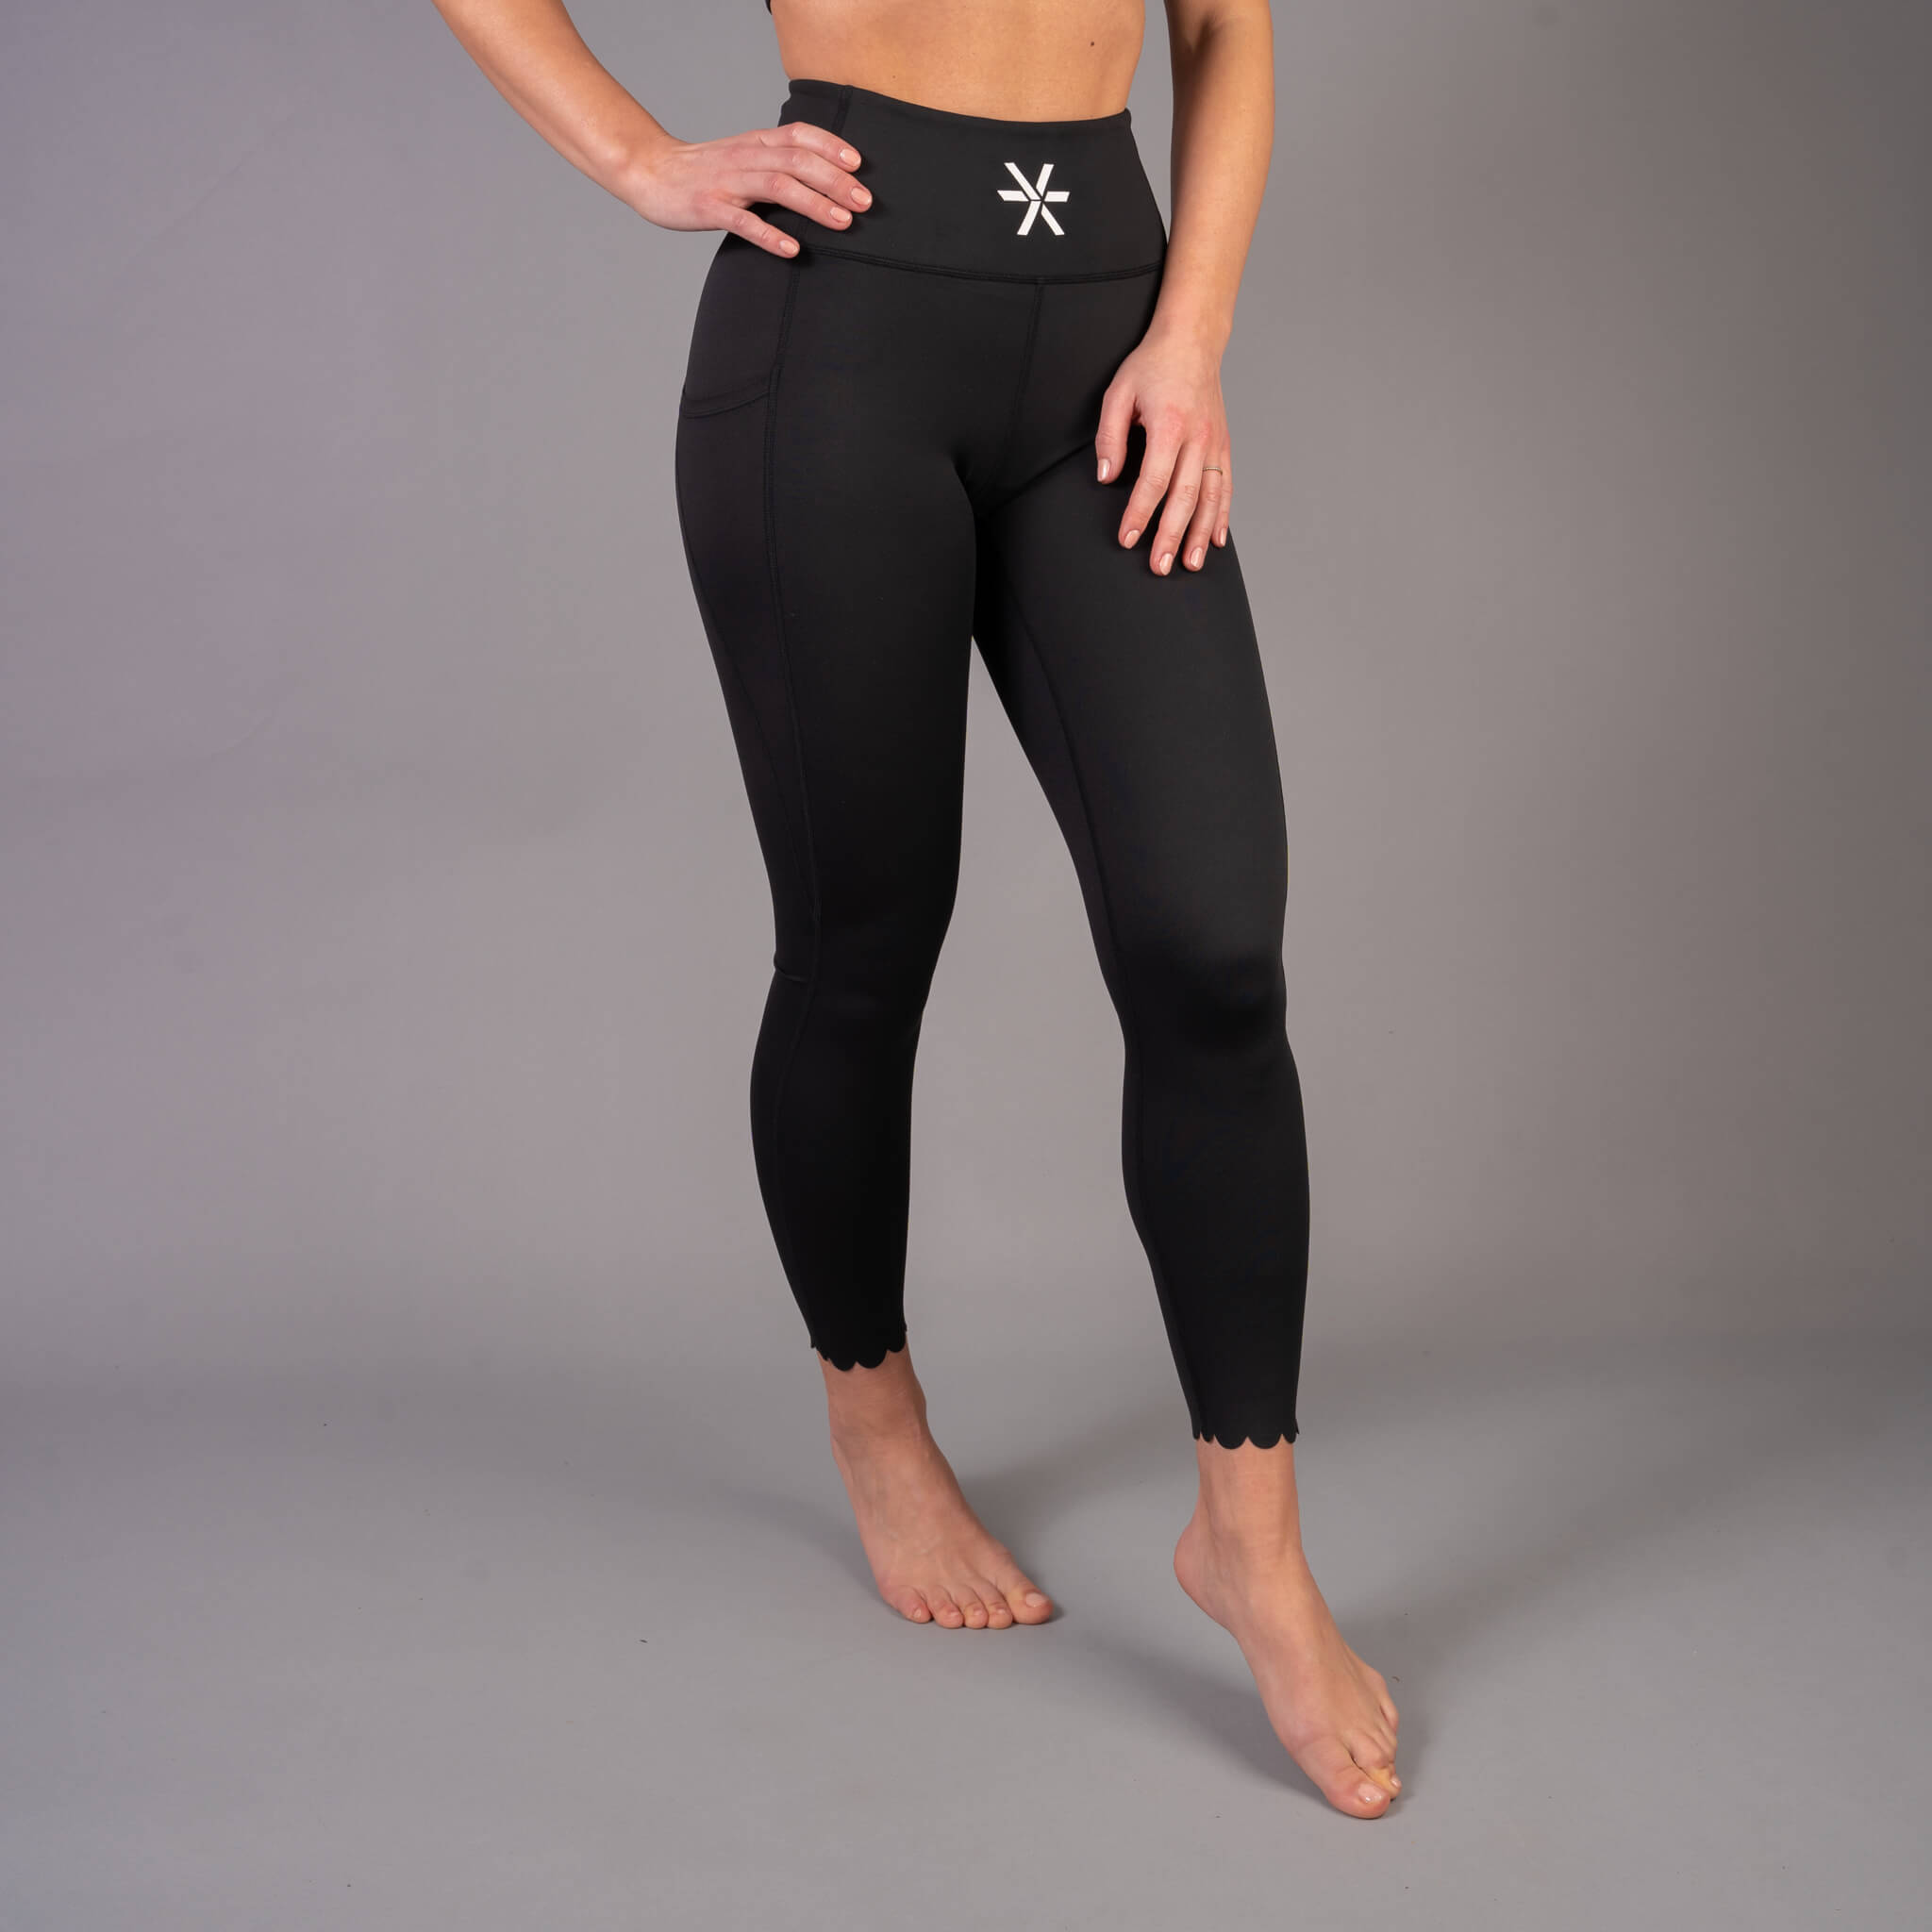 Buy BLINKIN Stretchable Gym Pants for Women & Tights for Women Workout with  Mesh Insert & Side Pockets (2670,Color_Black,Size_S) at Amazon.in